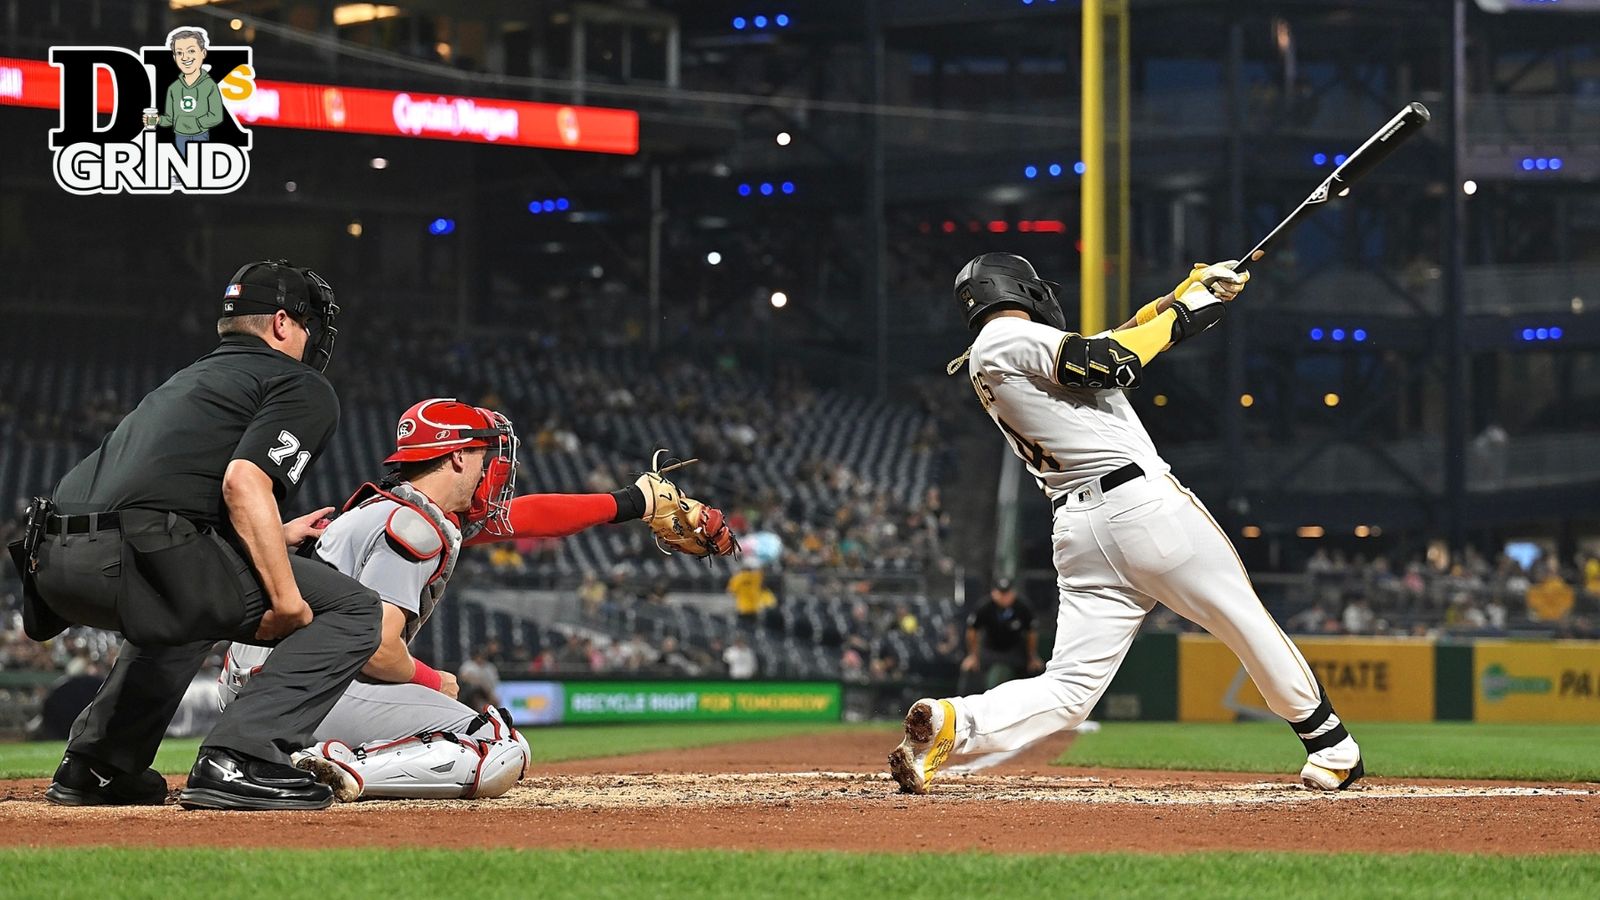 Sporadic offensive outbursts can't mask Pirates' broader issues